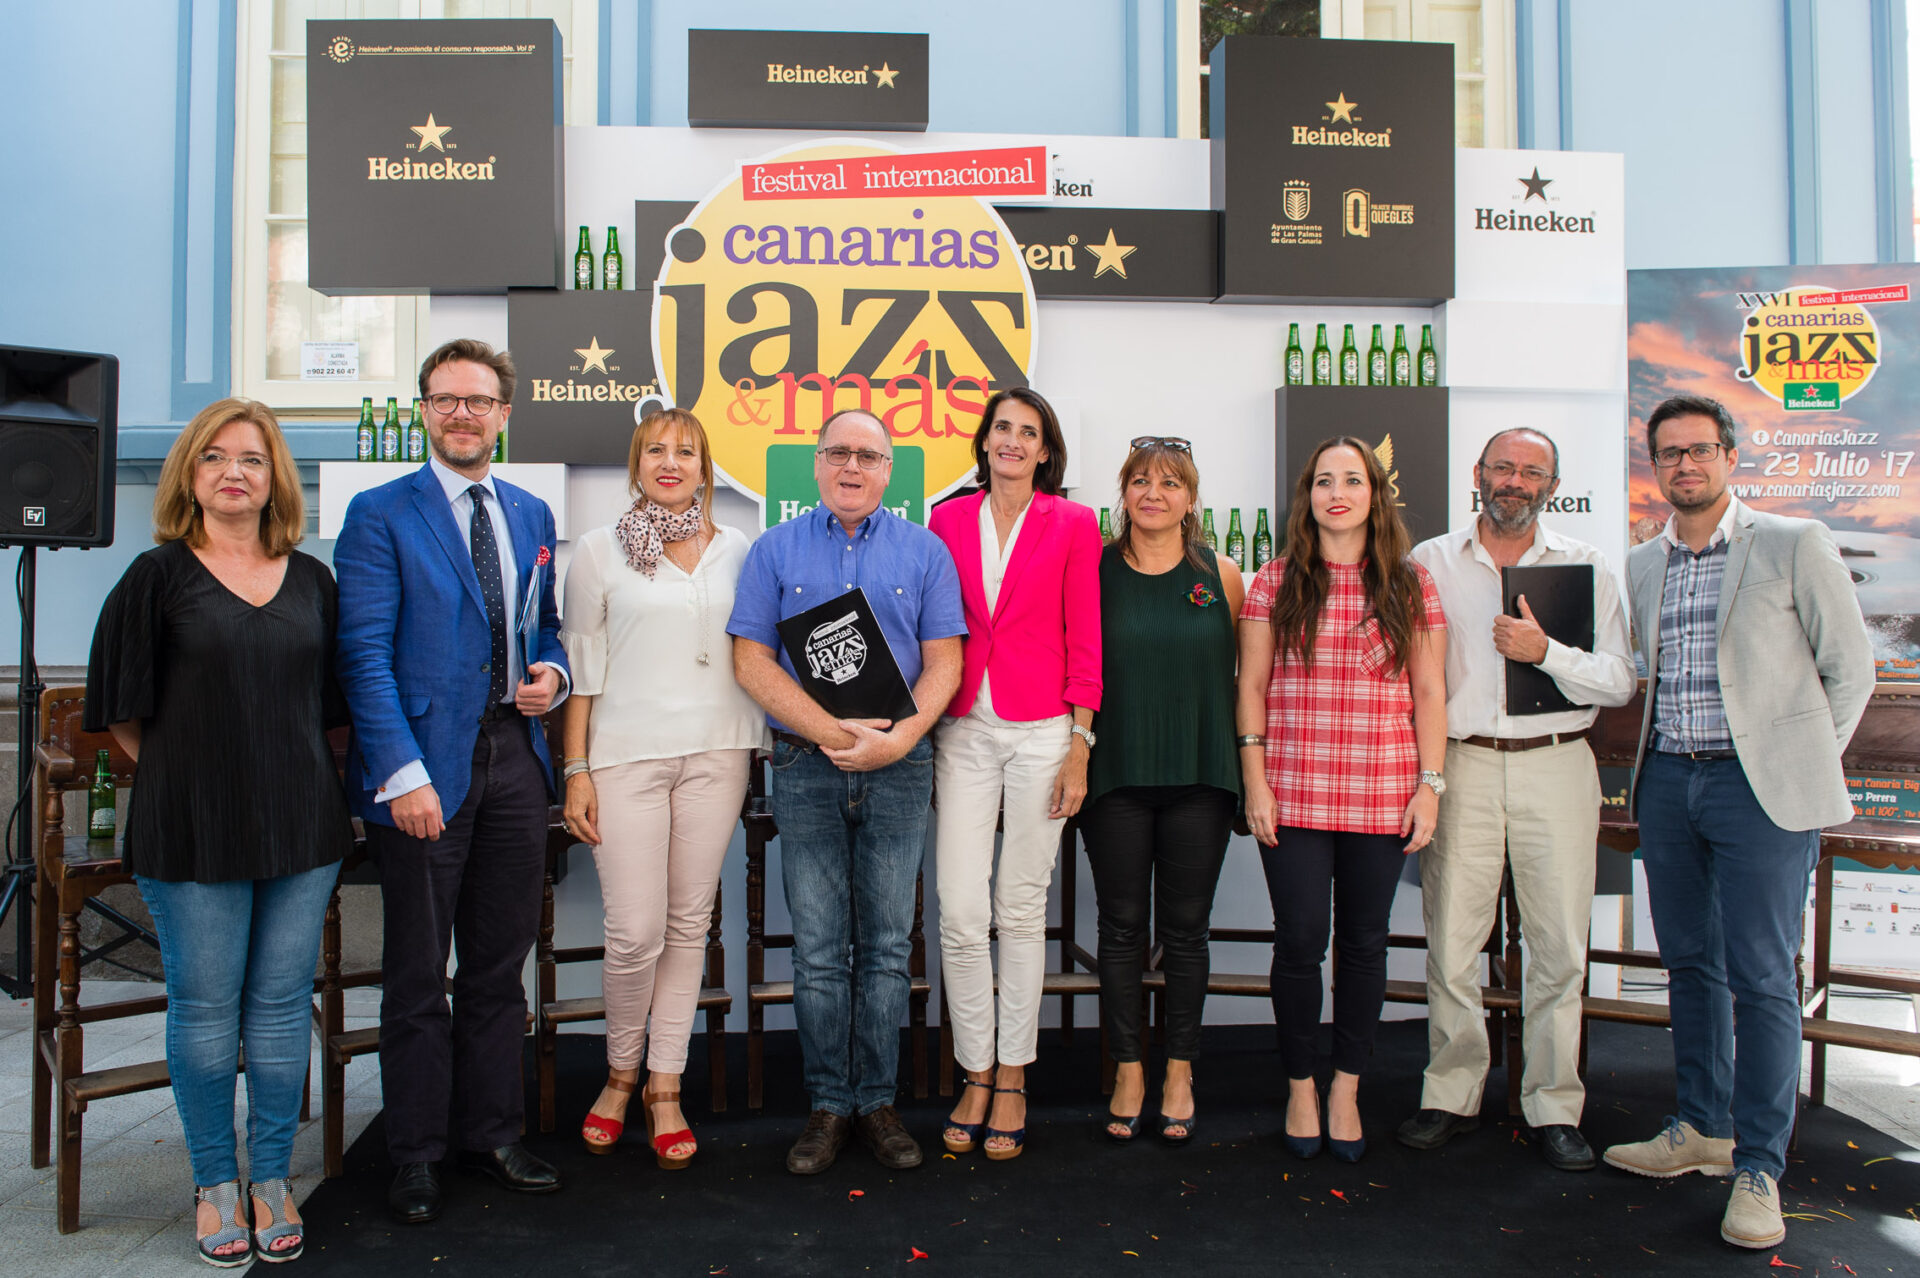 The Festival Canarias Jazz&Más Heineken kicks off on Friday with four concerts on four islands